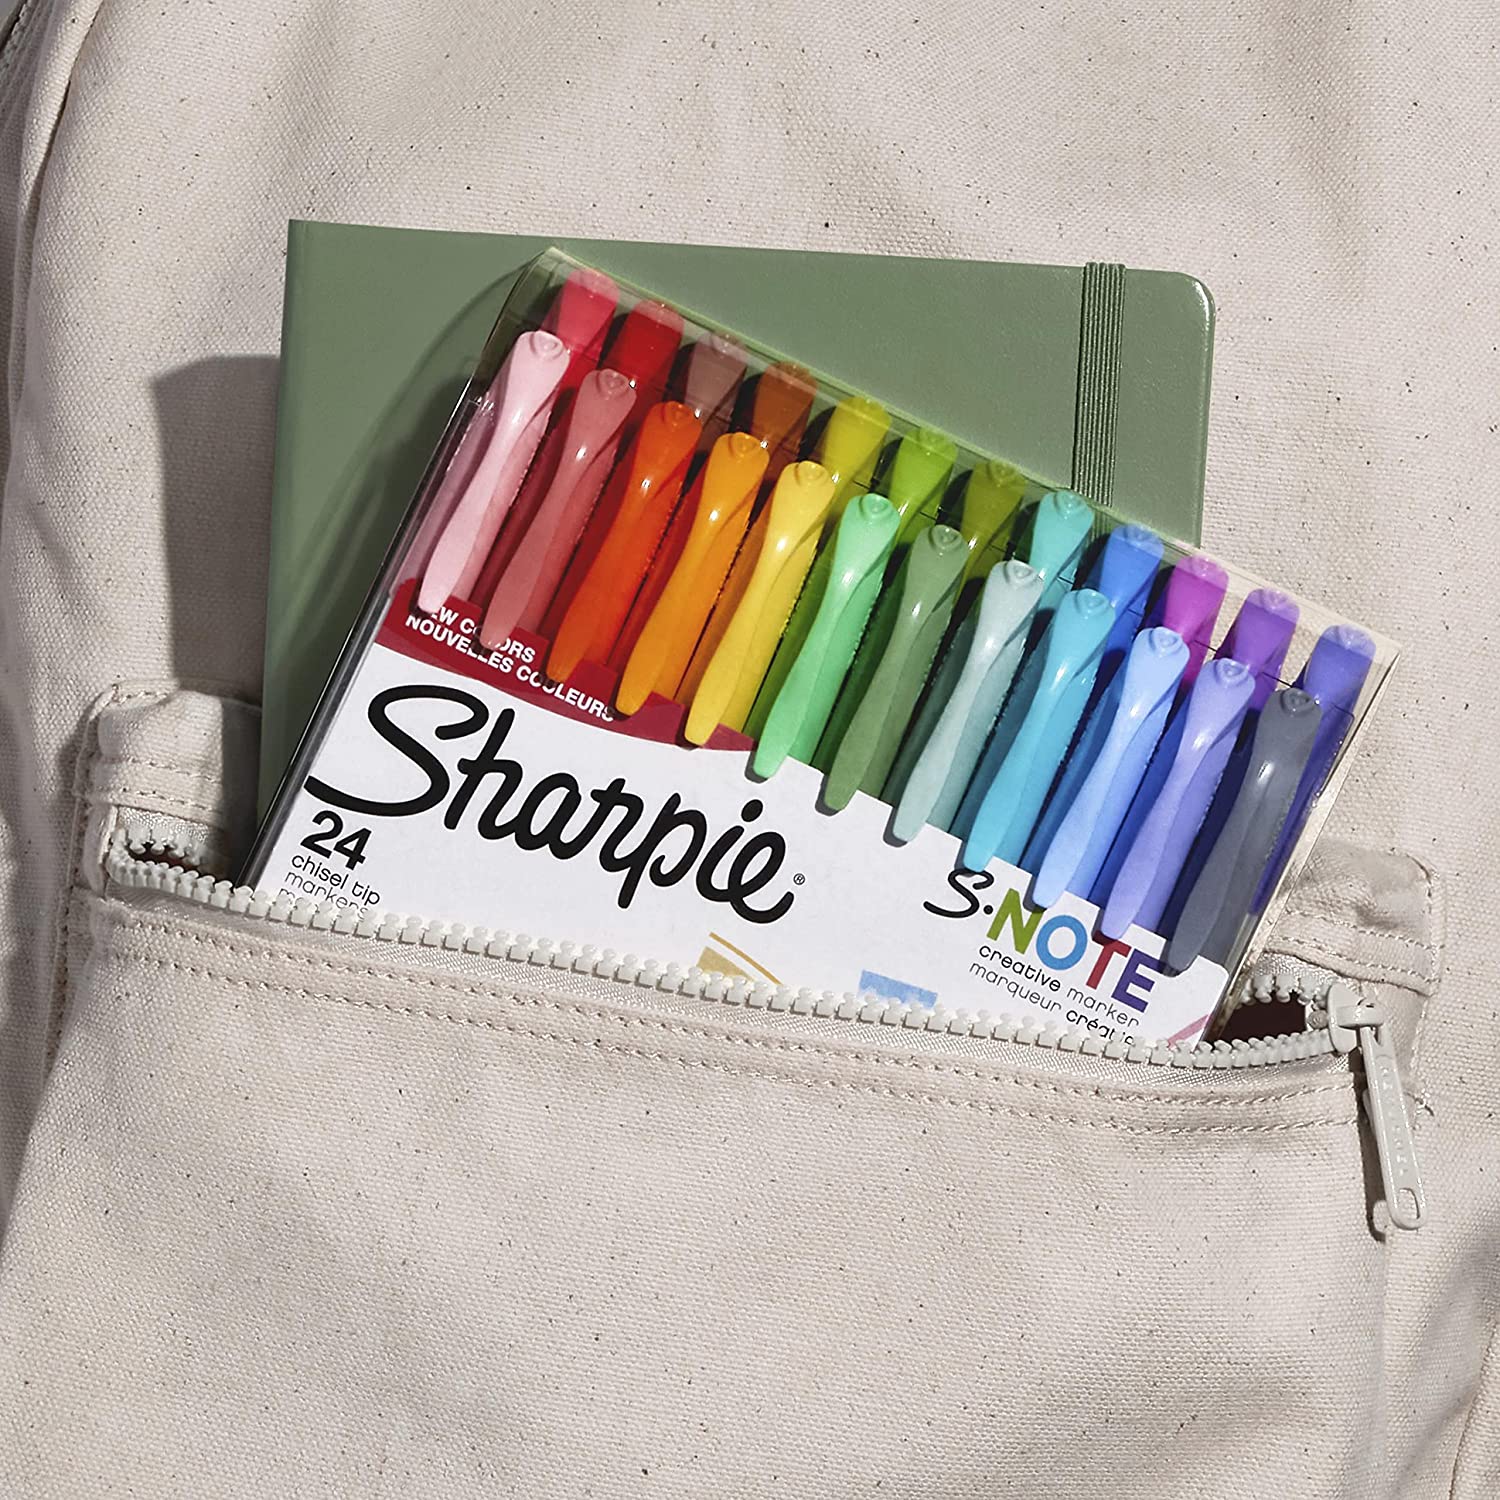 Sharpie S-Note Creative Markers in pocket